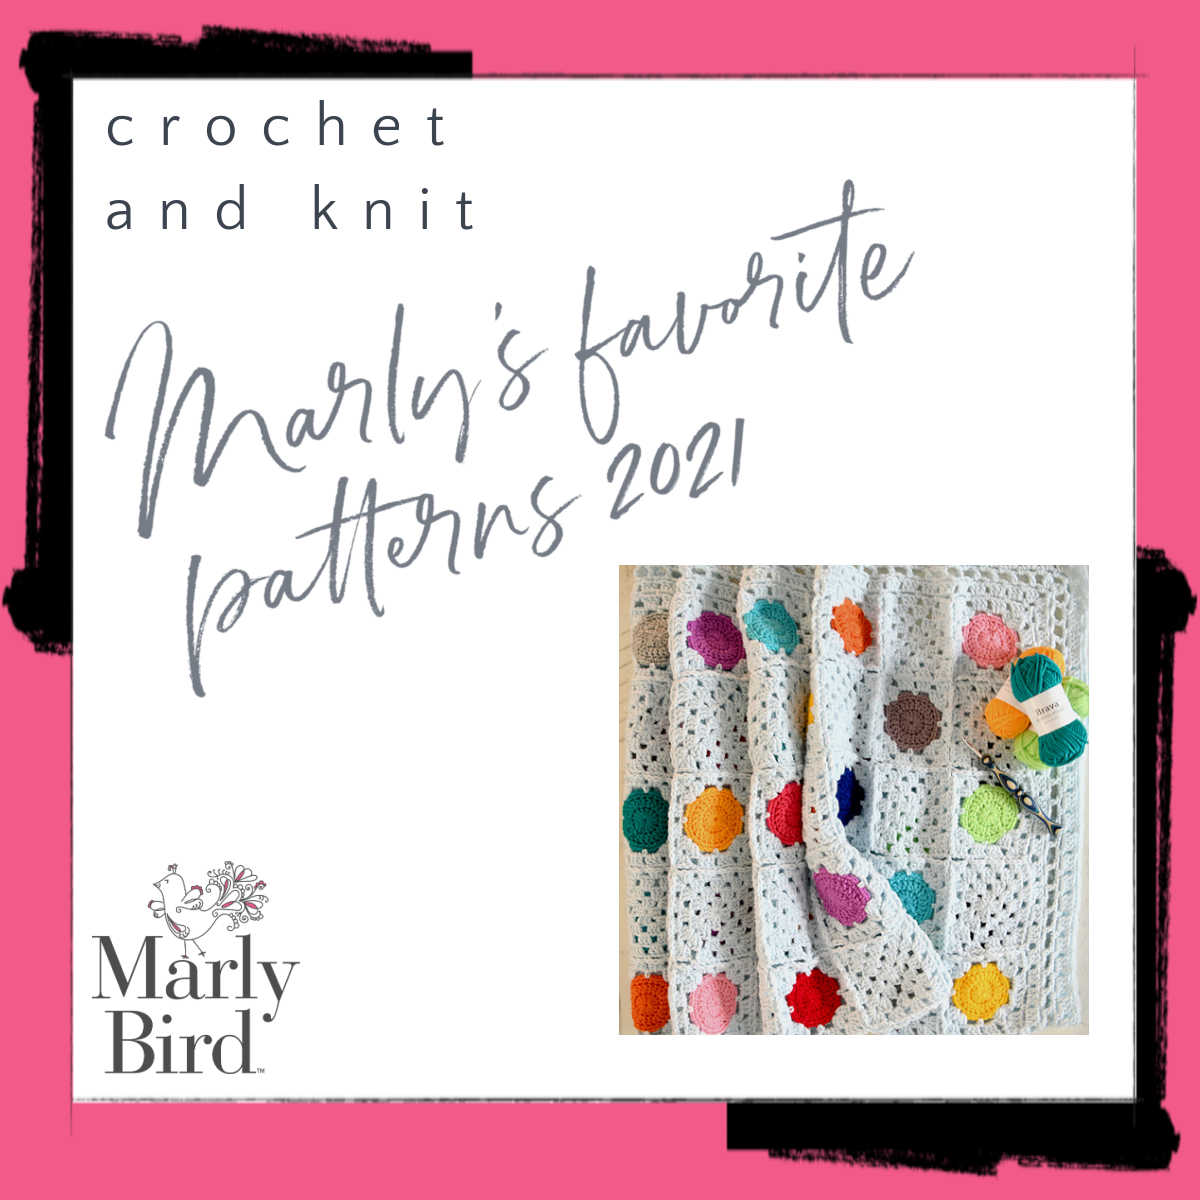 Promotional image featuring a collection titled "Favorite Patterns 2021" with crochet and knit samples displayed, including colorful yarn balls on a swatch of neutral crochet work. -Marly Bird